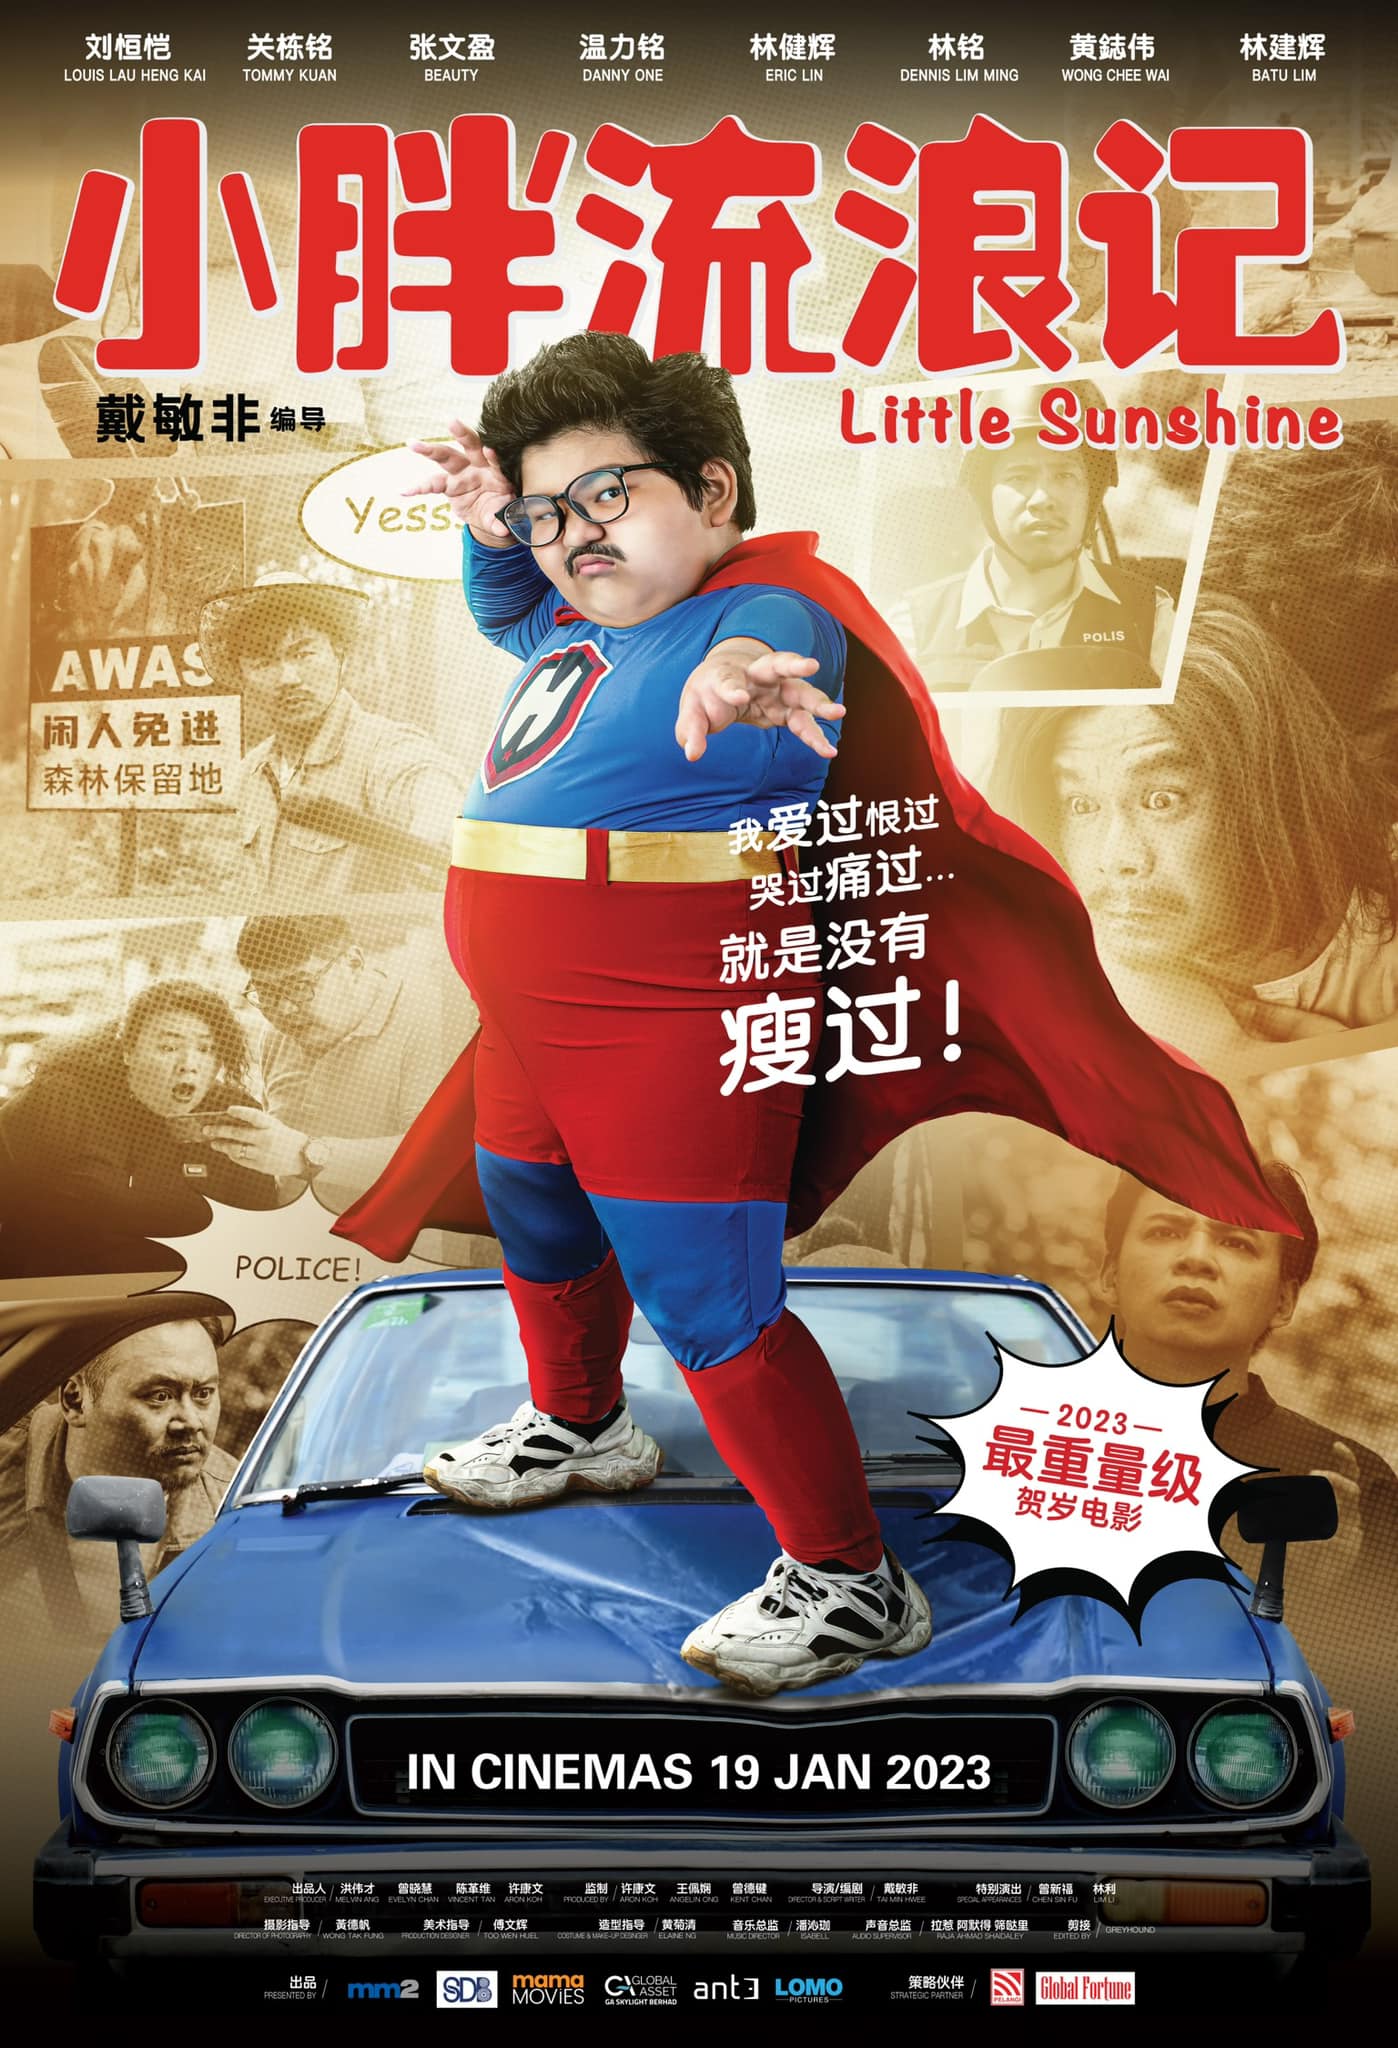 Little Sunshine Movie (2023) Cast, Release Date, Story, Budget, Collection, Poster, Trailer, Review